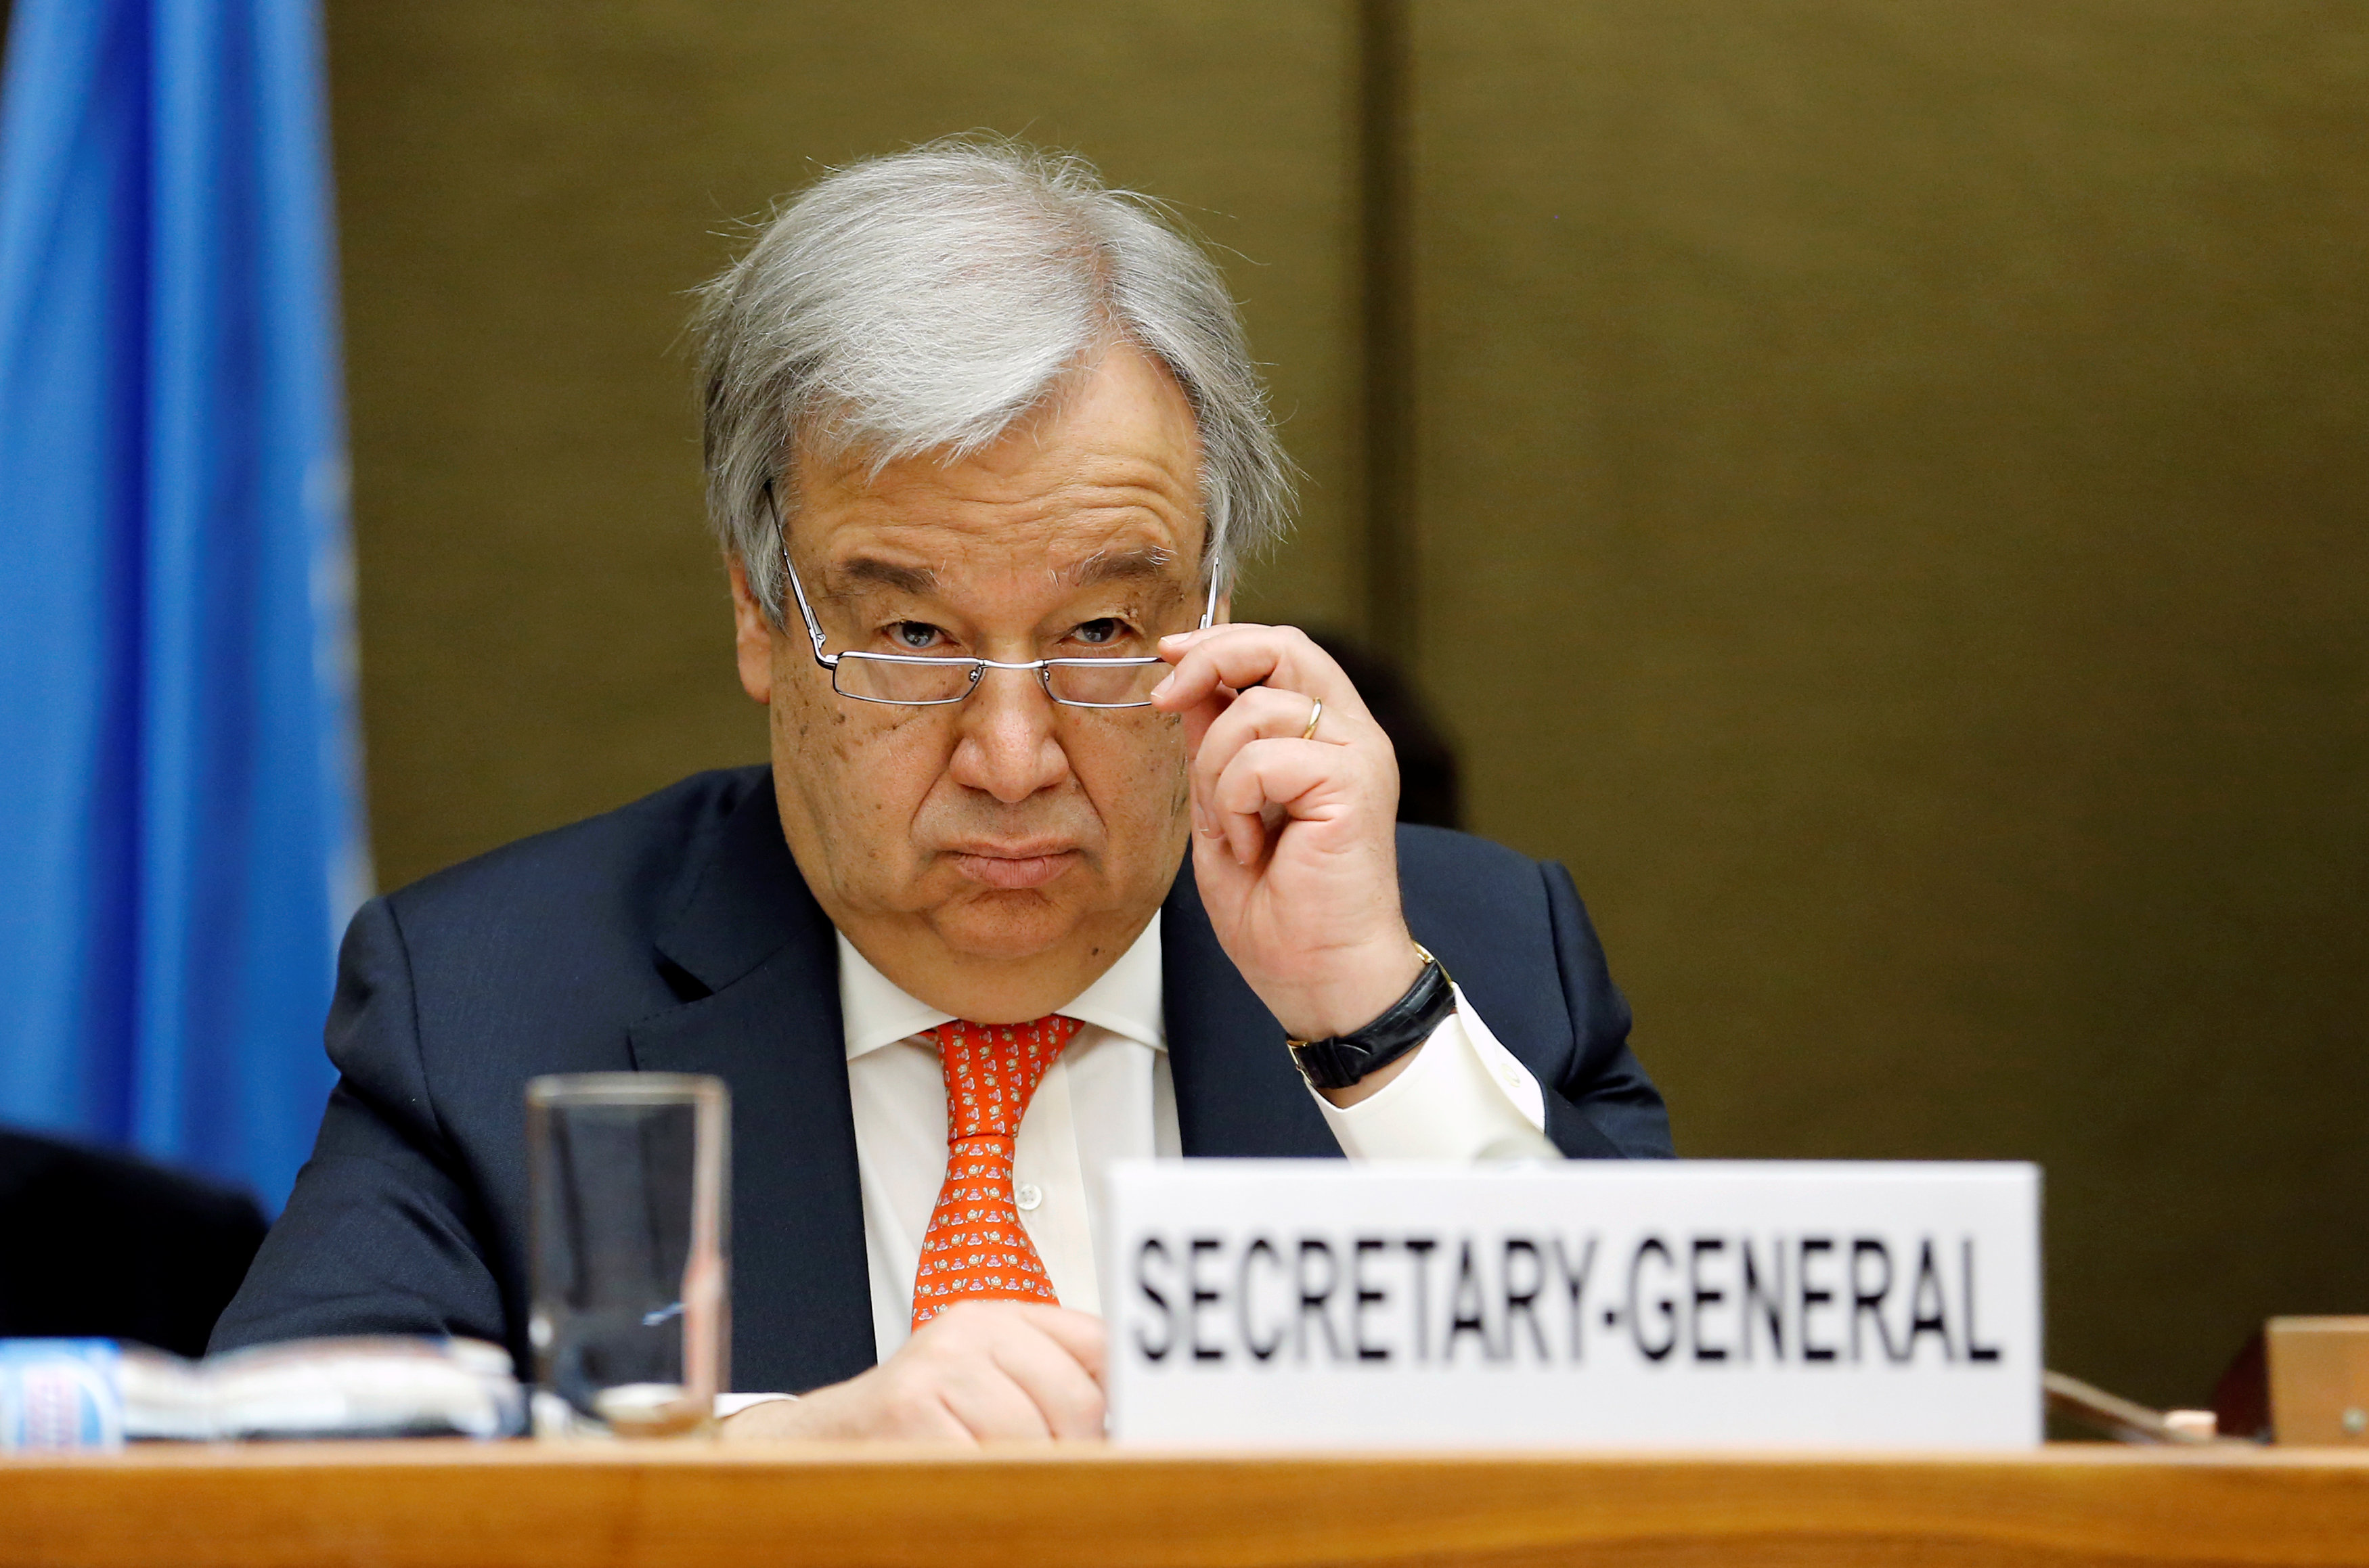 Yemen, UN chief seek peace talks with Houthis